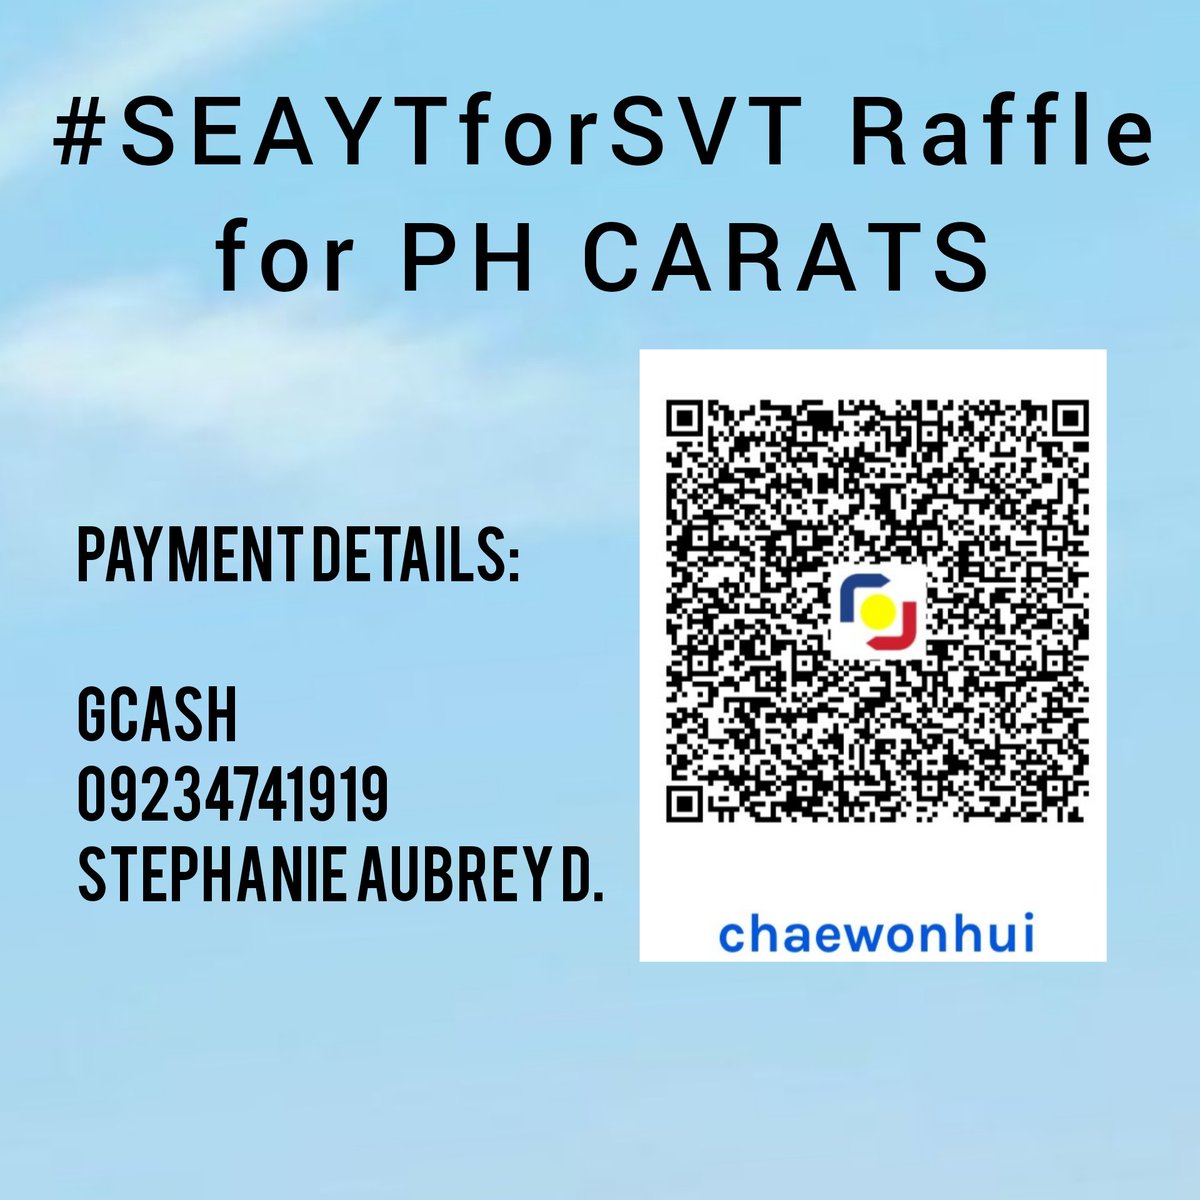 #SEAYTforSVT Raffle for PH CARATS

Since the comeback is near, i decided to do a donation raffle. There will be 3 winners! The money that I will get will be donated to @CaratLandPH.

more details in the pictures below!!

@pledis_17 #세븐틴